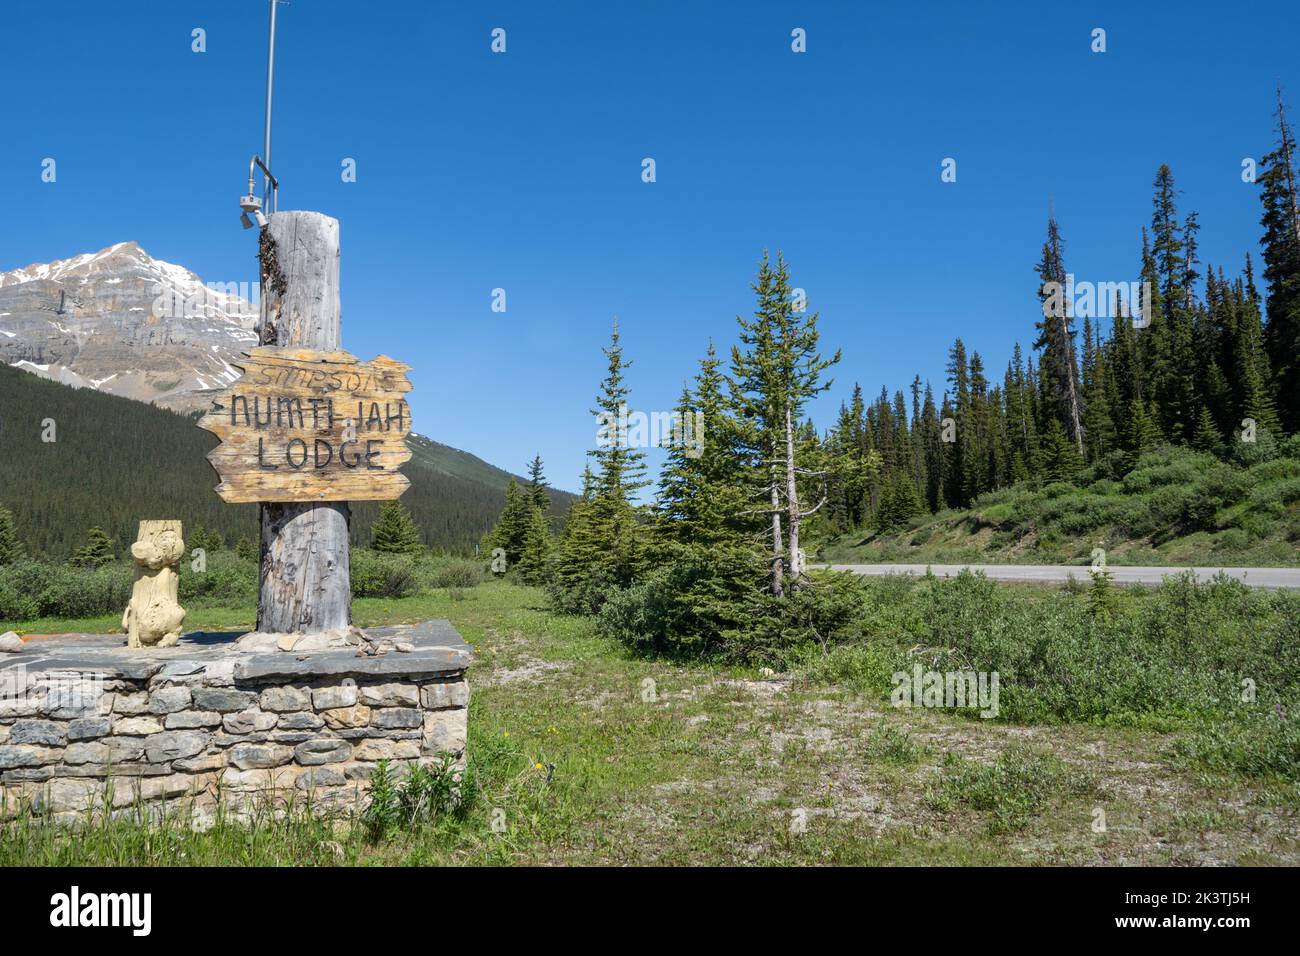 Alberta, Canada - July 12, 2022: Sign for the Simpsons Numti-Jah Lodge at Bow Lake Stock Photo